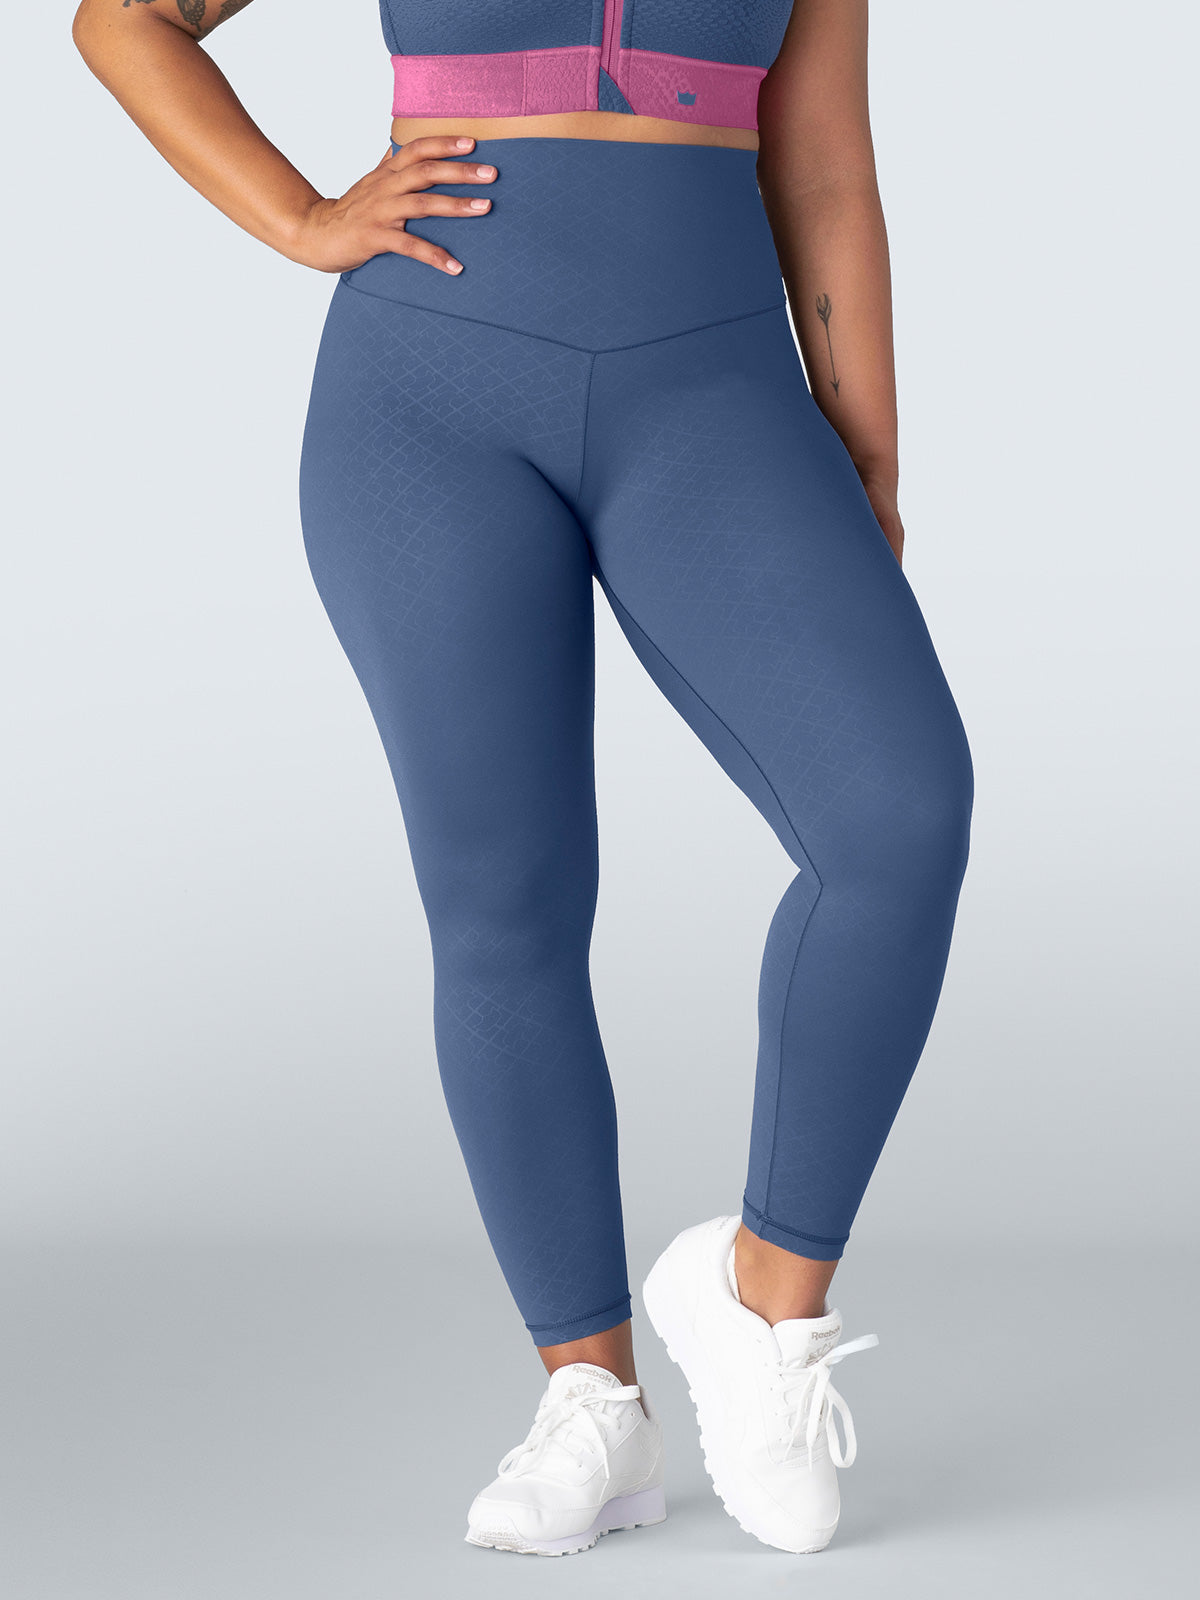 TIYOMI Plus Size Women's Navy Blue Leggings 2X Full Length Pants Stretchy  High Waist Ankle Leggings Solid Color Butt Fit Pants Workout Warm Fall  Winter Leggings 2XL 18W 20W 